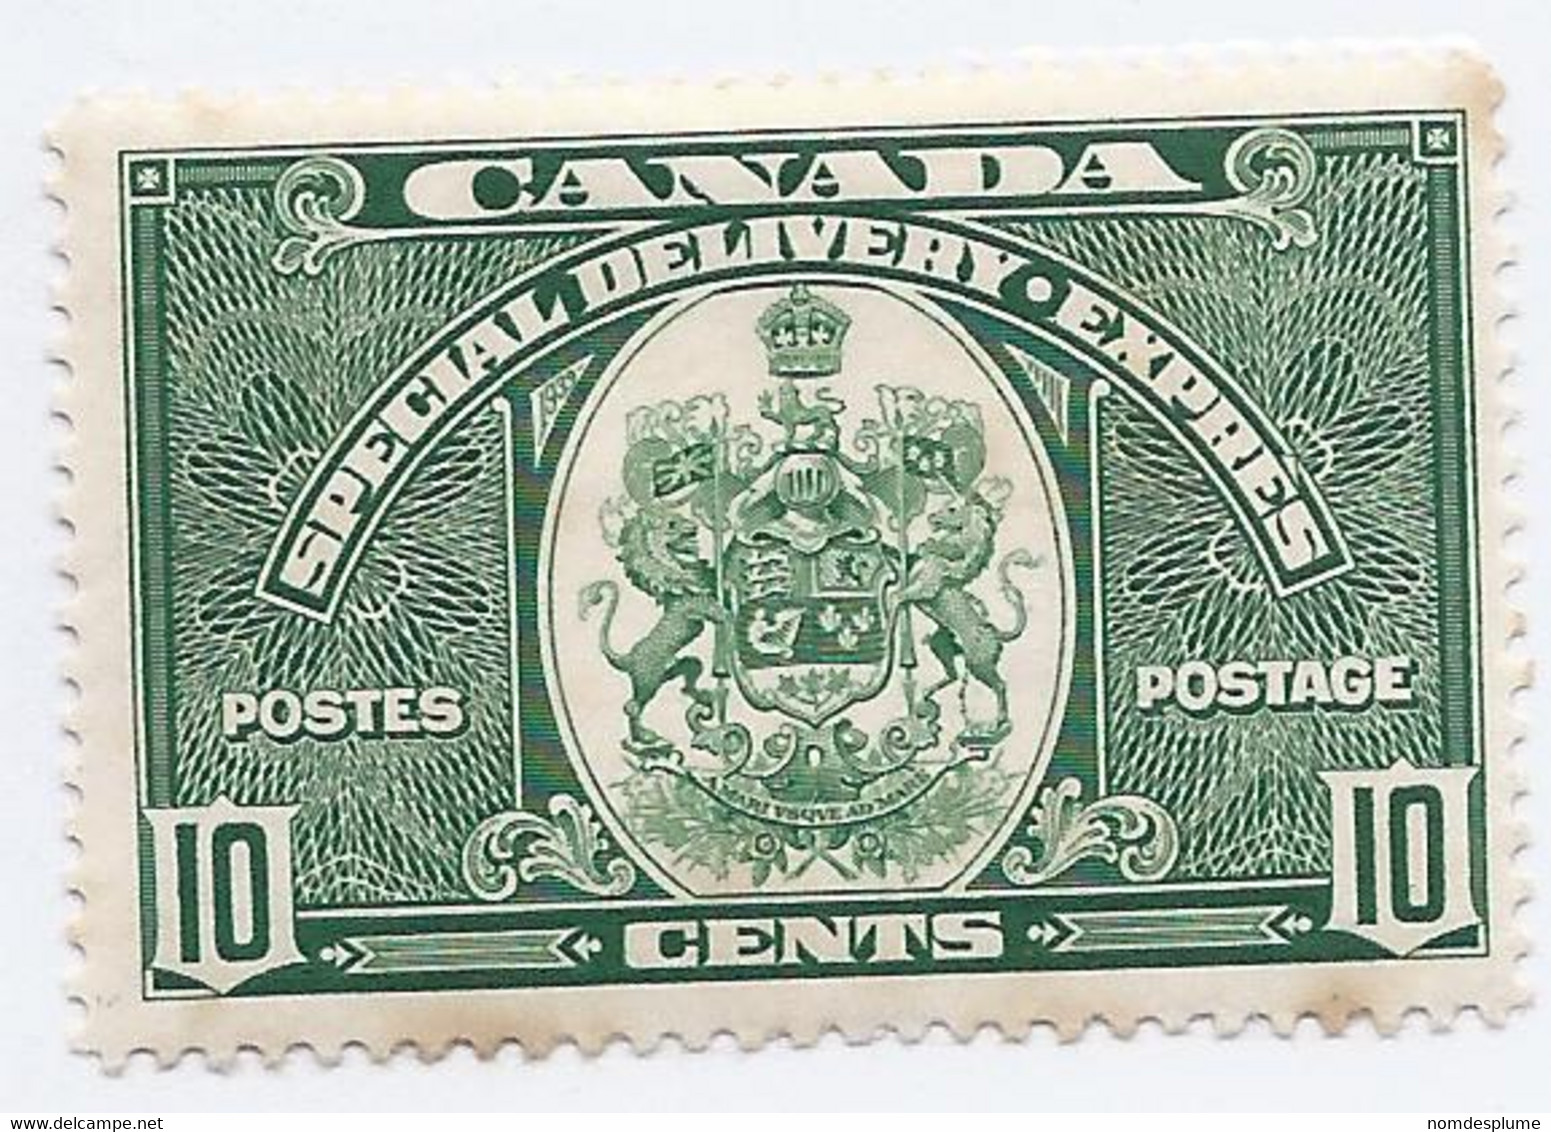 15986) Canada 1938  Mint Hinge Special Delivery - Correo Urgente